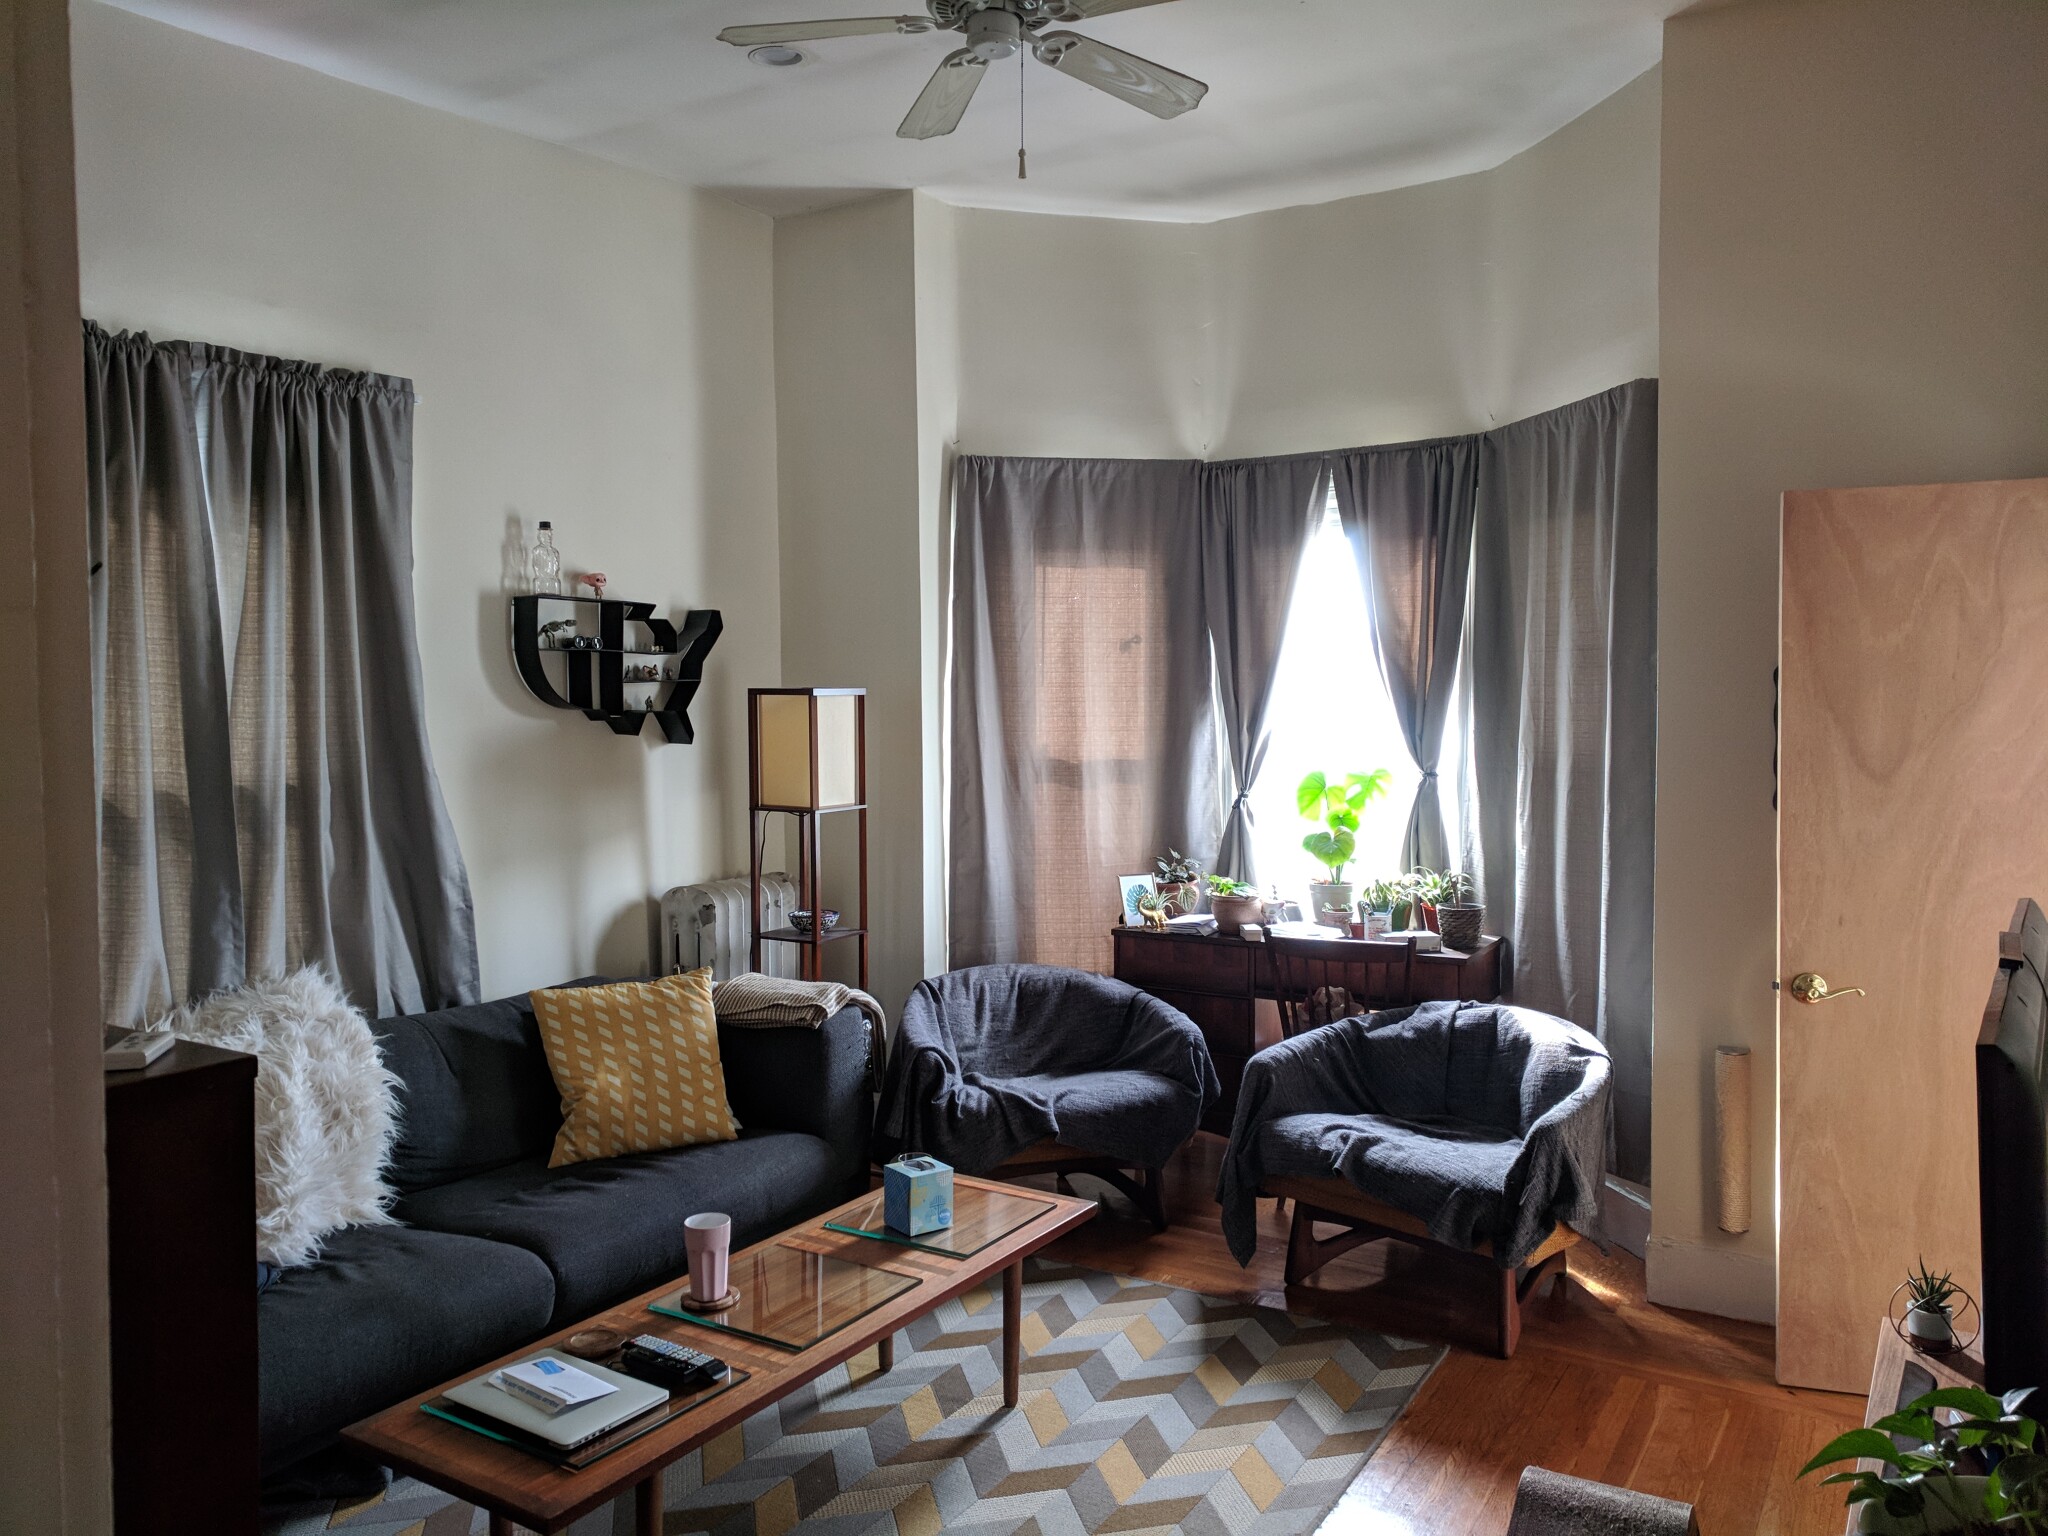 Photos of apartment on Durham St.,Somerville MA 02143